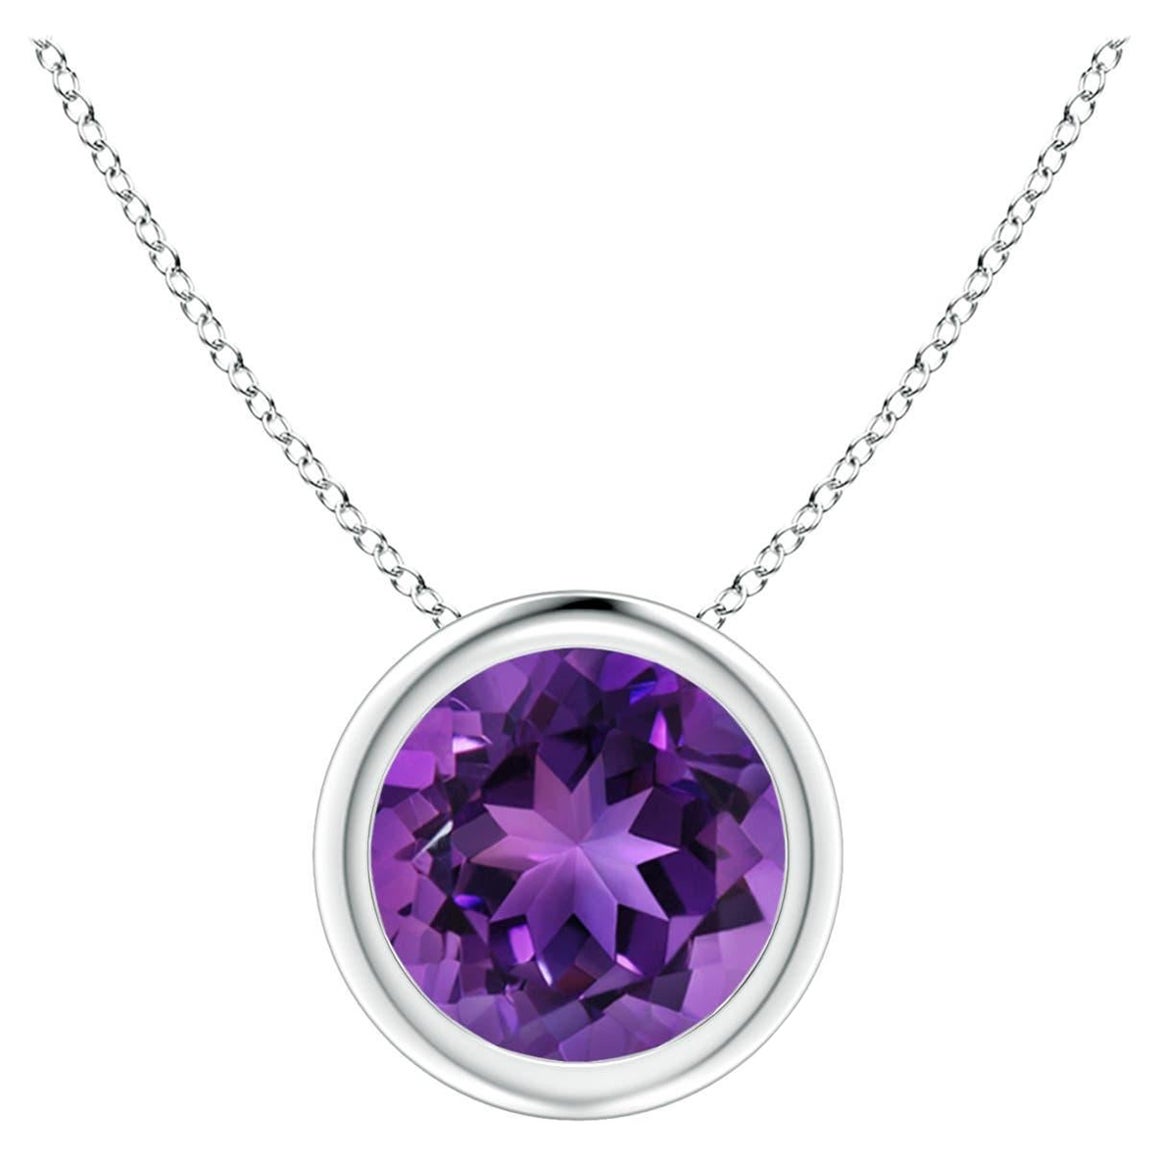 Natural Bezel-Set Round 1.15ct Amethyst Solitaire Pendant in 14K White Gold